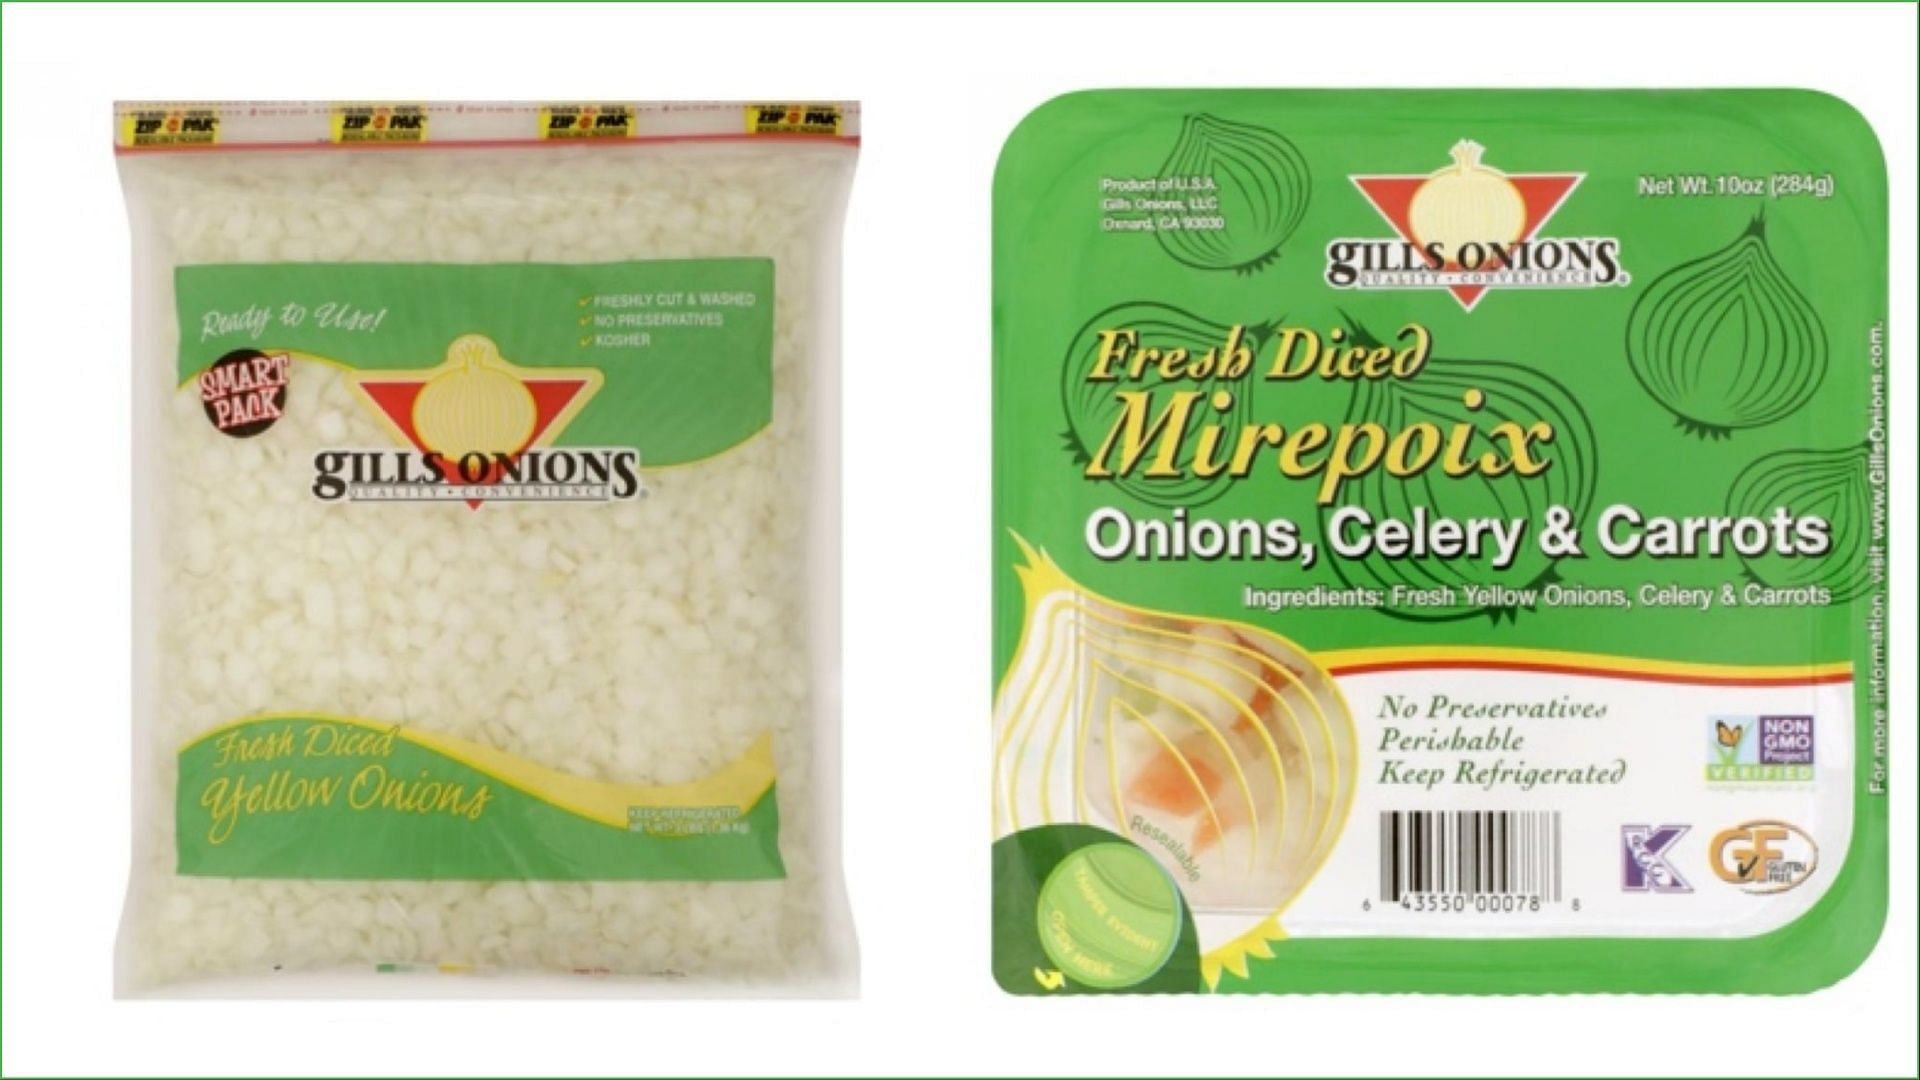 The recalled diced onions by Gills Onions should be disposed of safely (Image via FDA)